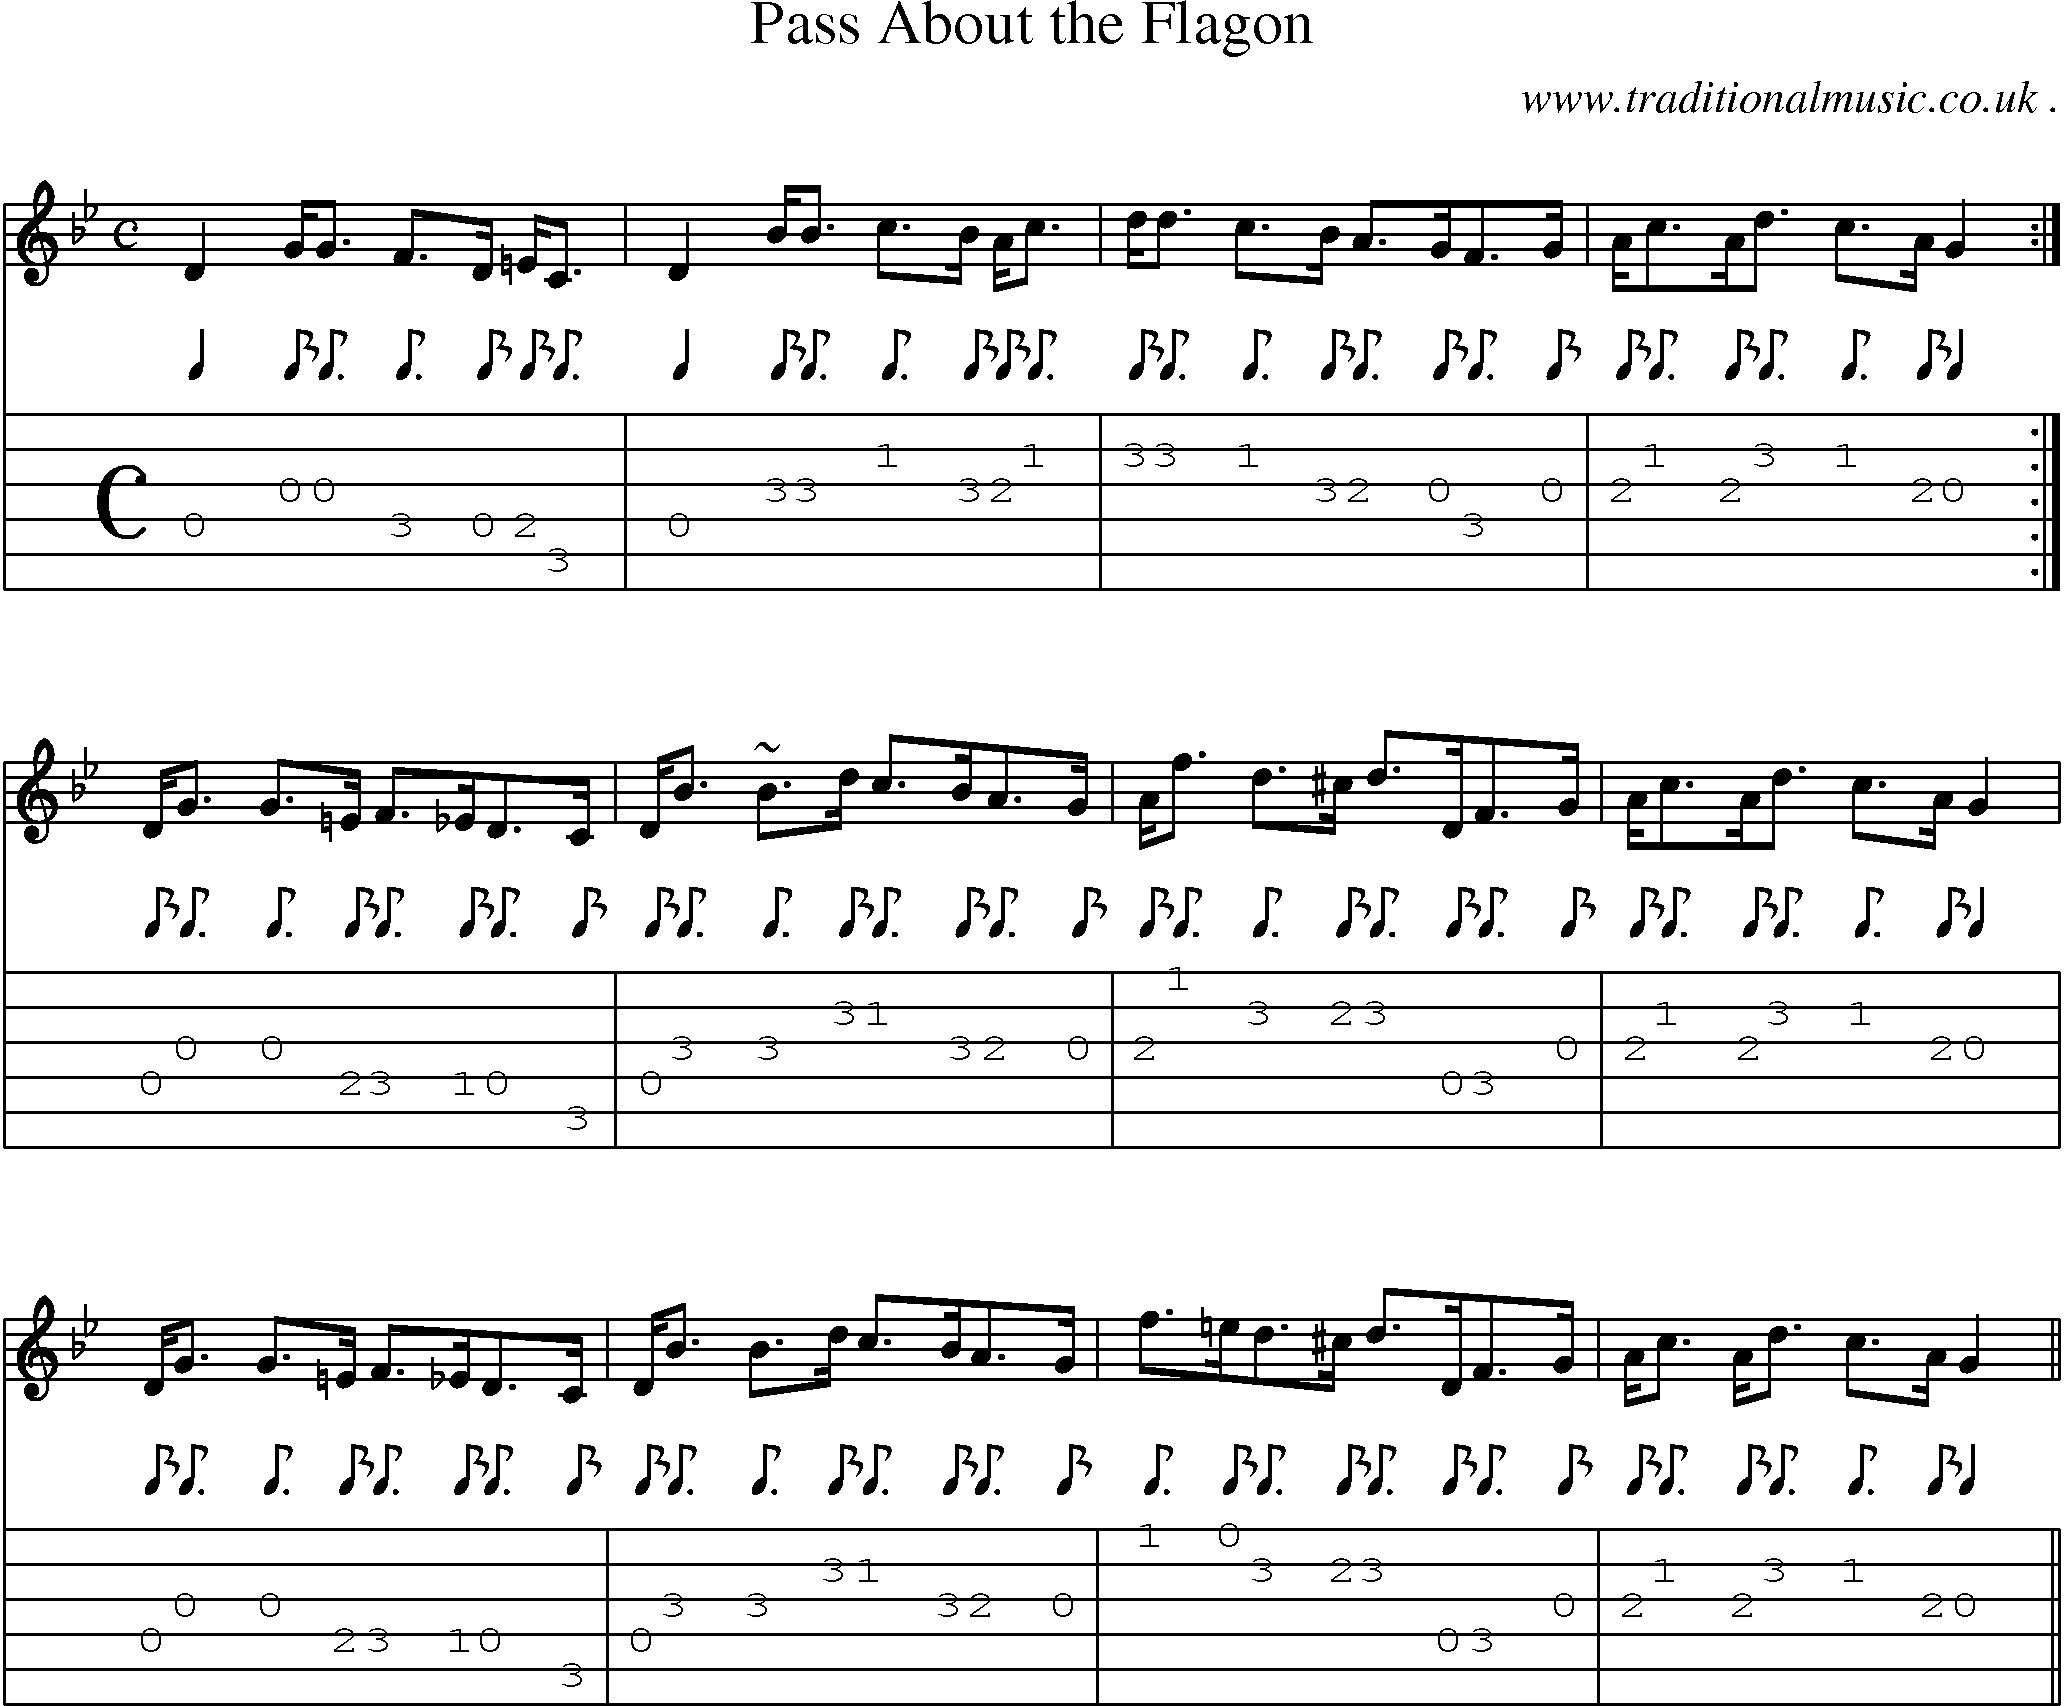 Sheet-music  score, Chords and Guitar Tabs for Pass About The Flagon